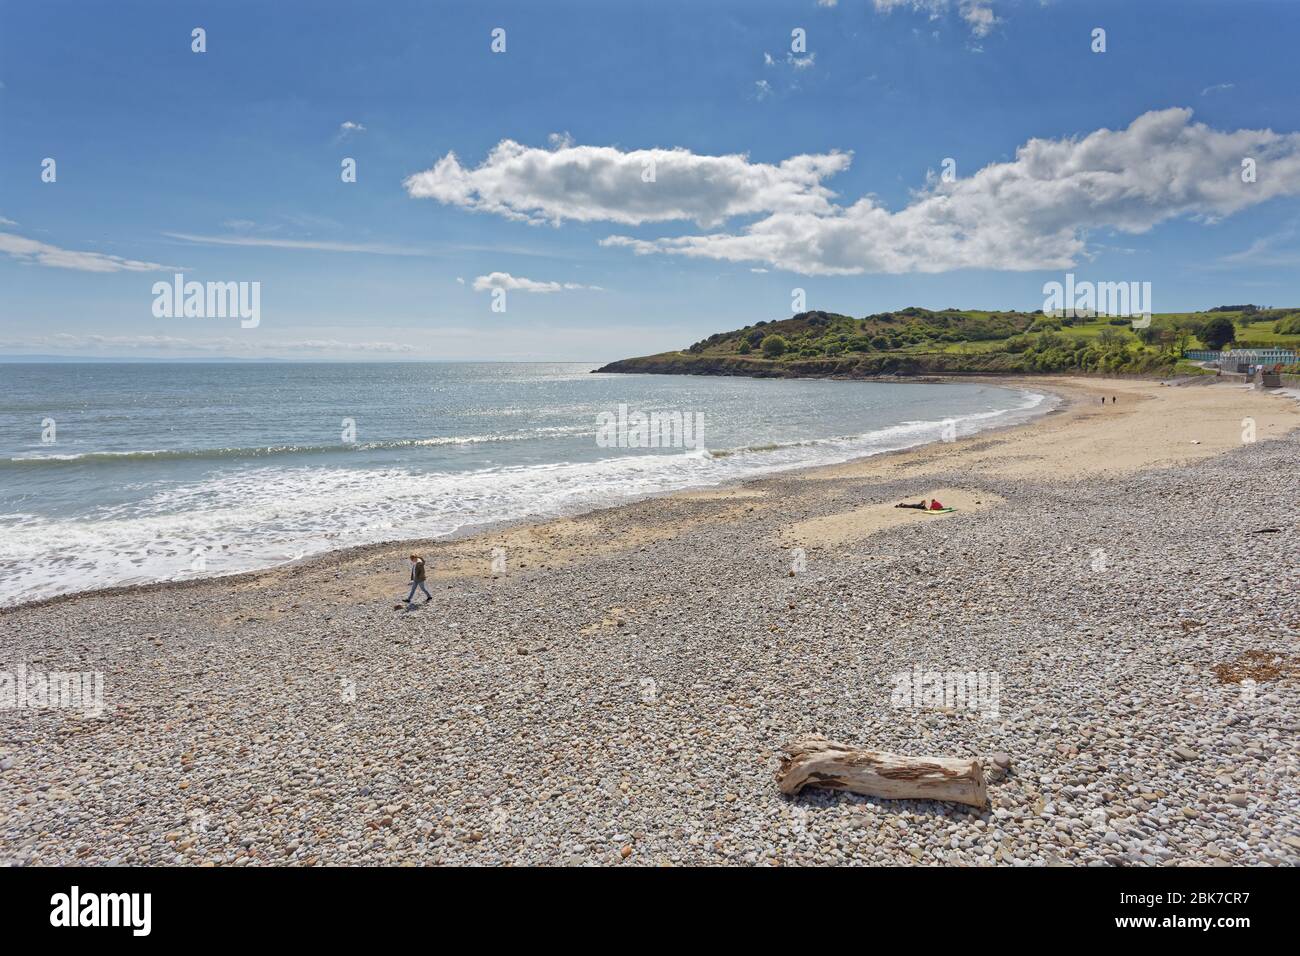 The almost deserted beach in Langland Bay Stock Photo